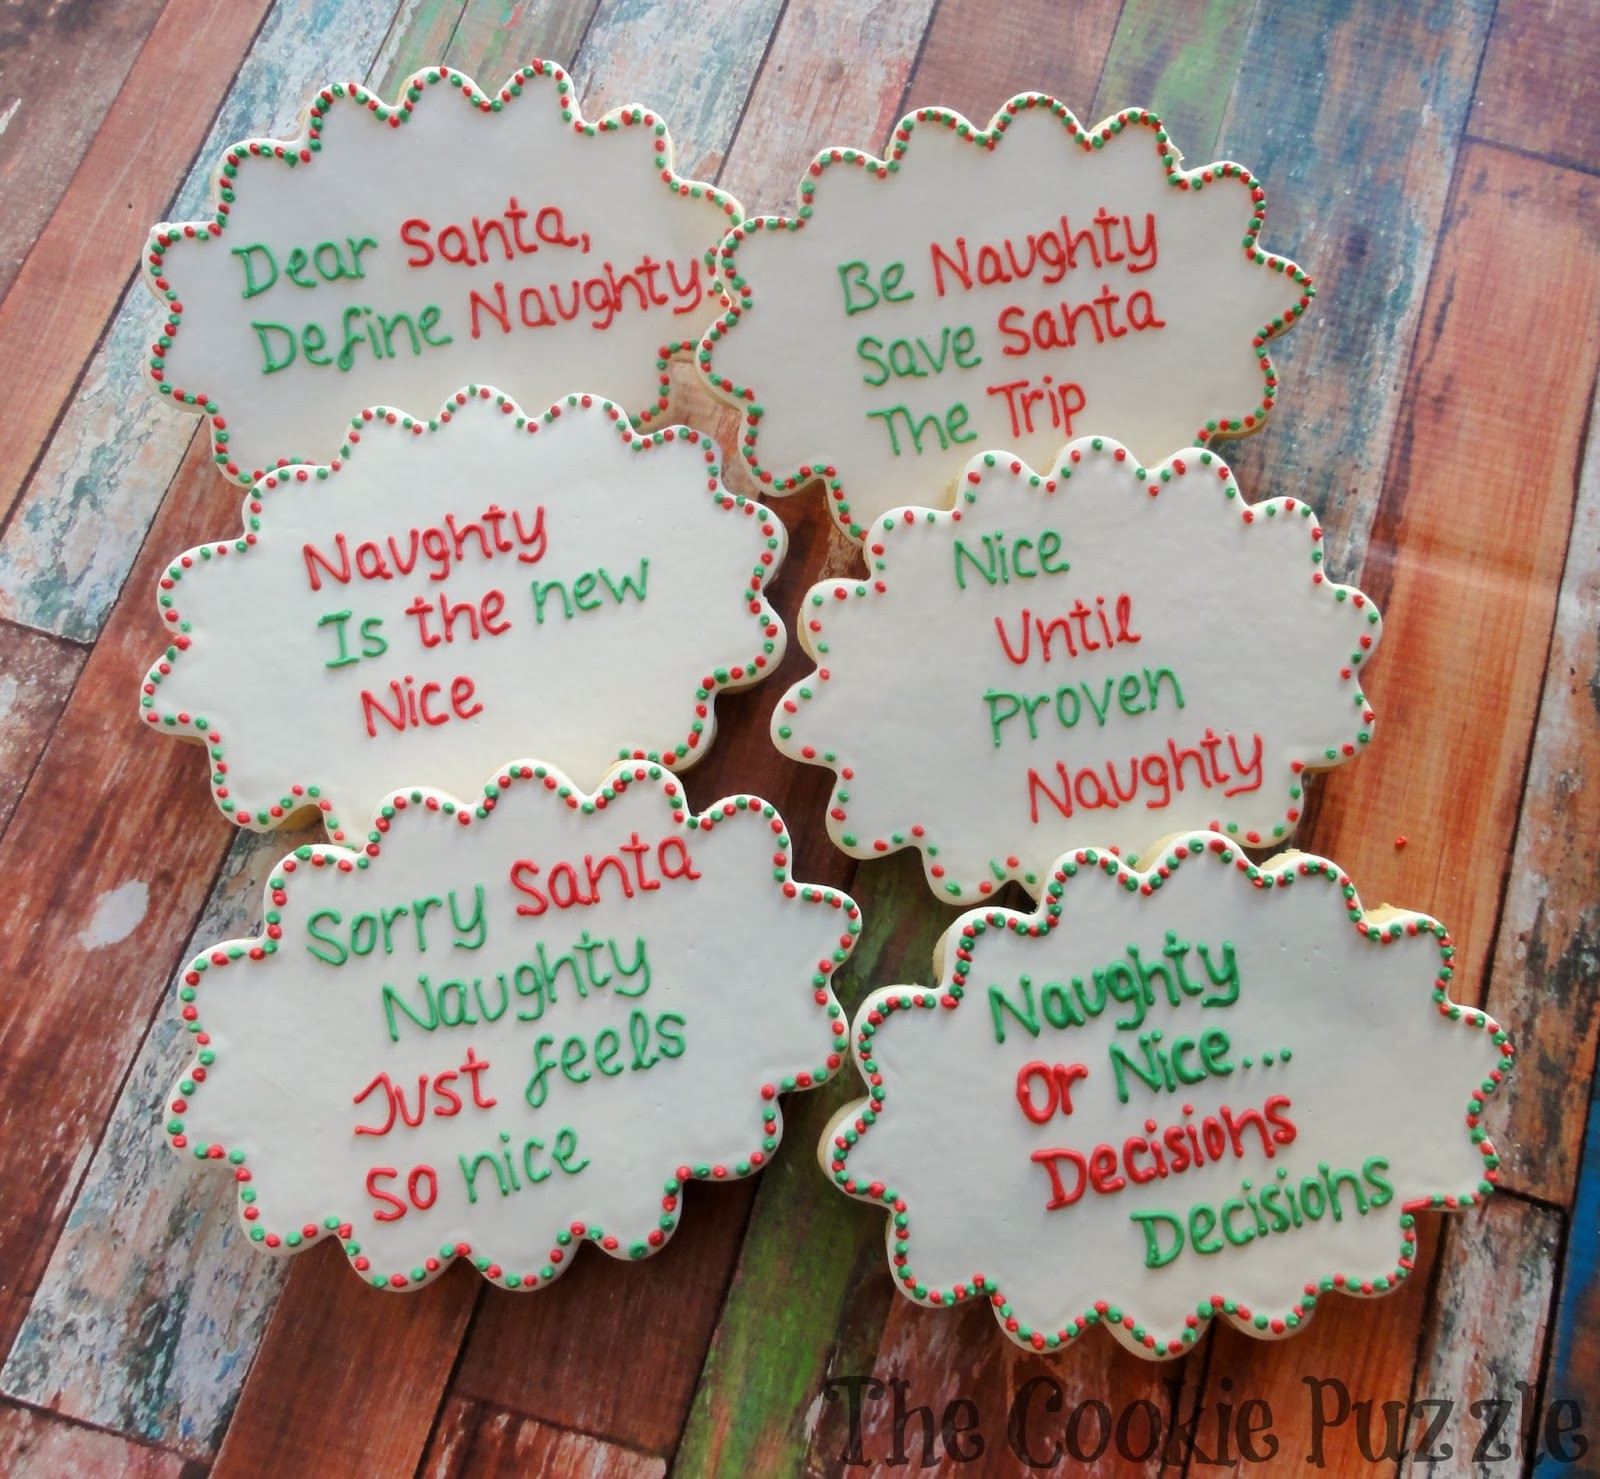 Naughty Christmas Quotes
 The Cookie Puzzle Naughty and Nice Christmas Cookies